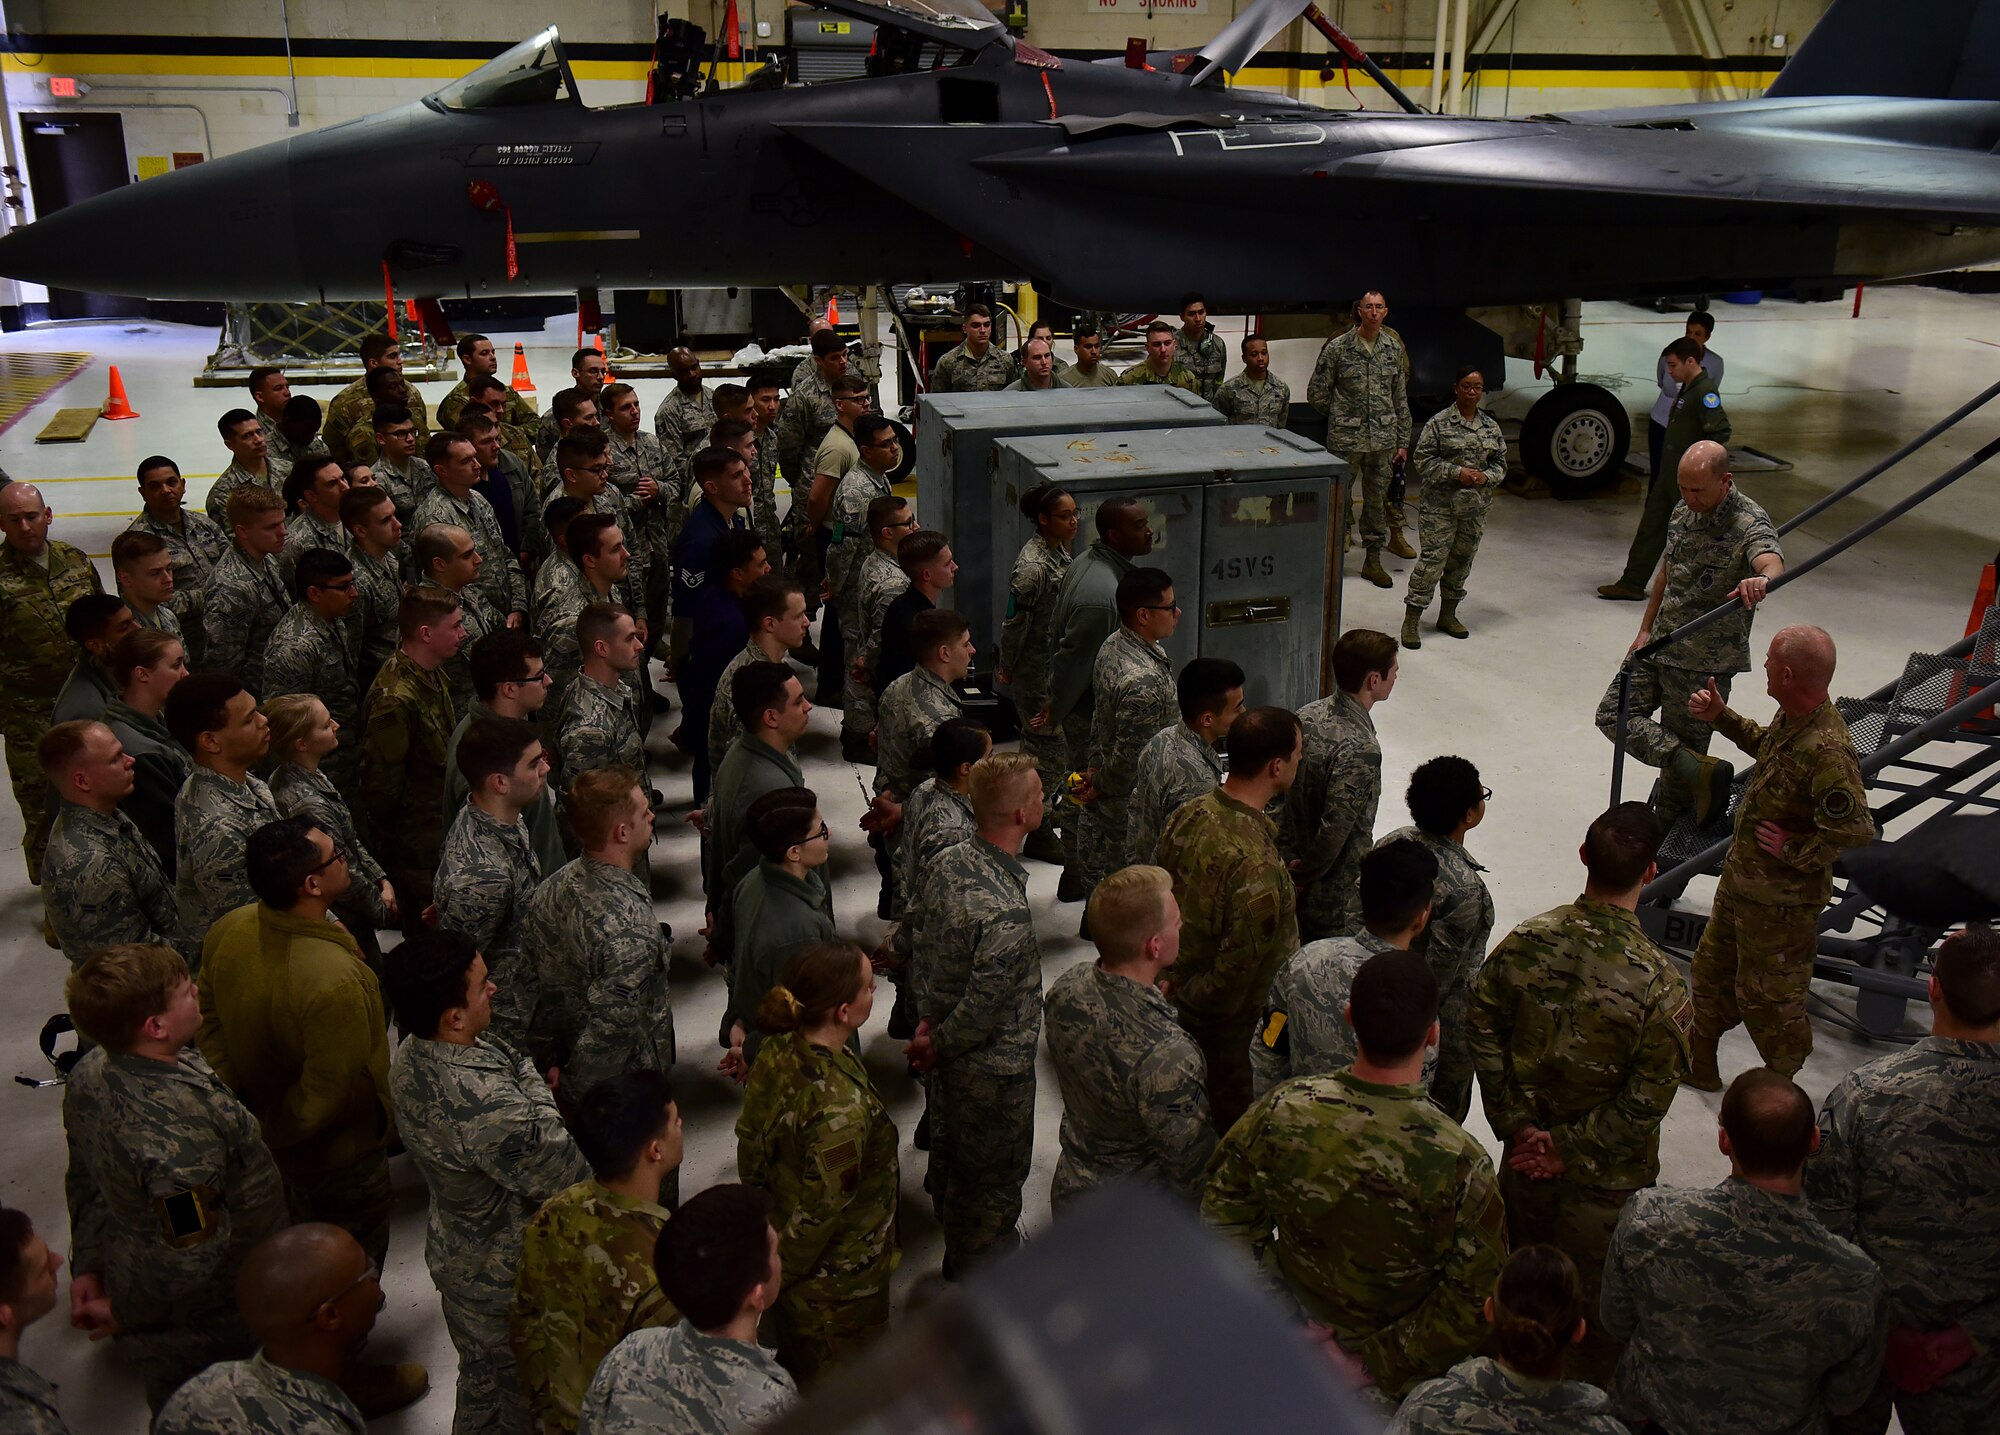 From right, Gen. Mike Holmes, commander of Air Combat Command, and Chief Master Sgt. Frank Batten, command chief of ACC, discuss possible solutions to challenges that Airmen are facing with members of the 336th Aircraft Maintenance Unit, Feb. 26, 2019, at Seymour Johnson Air Force Base, North Carolina. During the visit, Airmen had the opportunity to ask Holmes and Batten questions about personnel topics and the future of the Air Force. (U.S. Air Force photo by Senior Airman Kenneth Boyton)